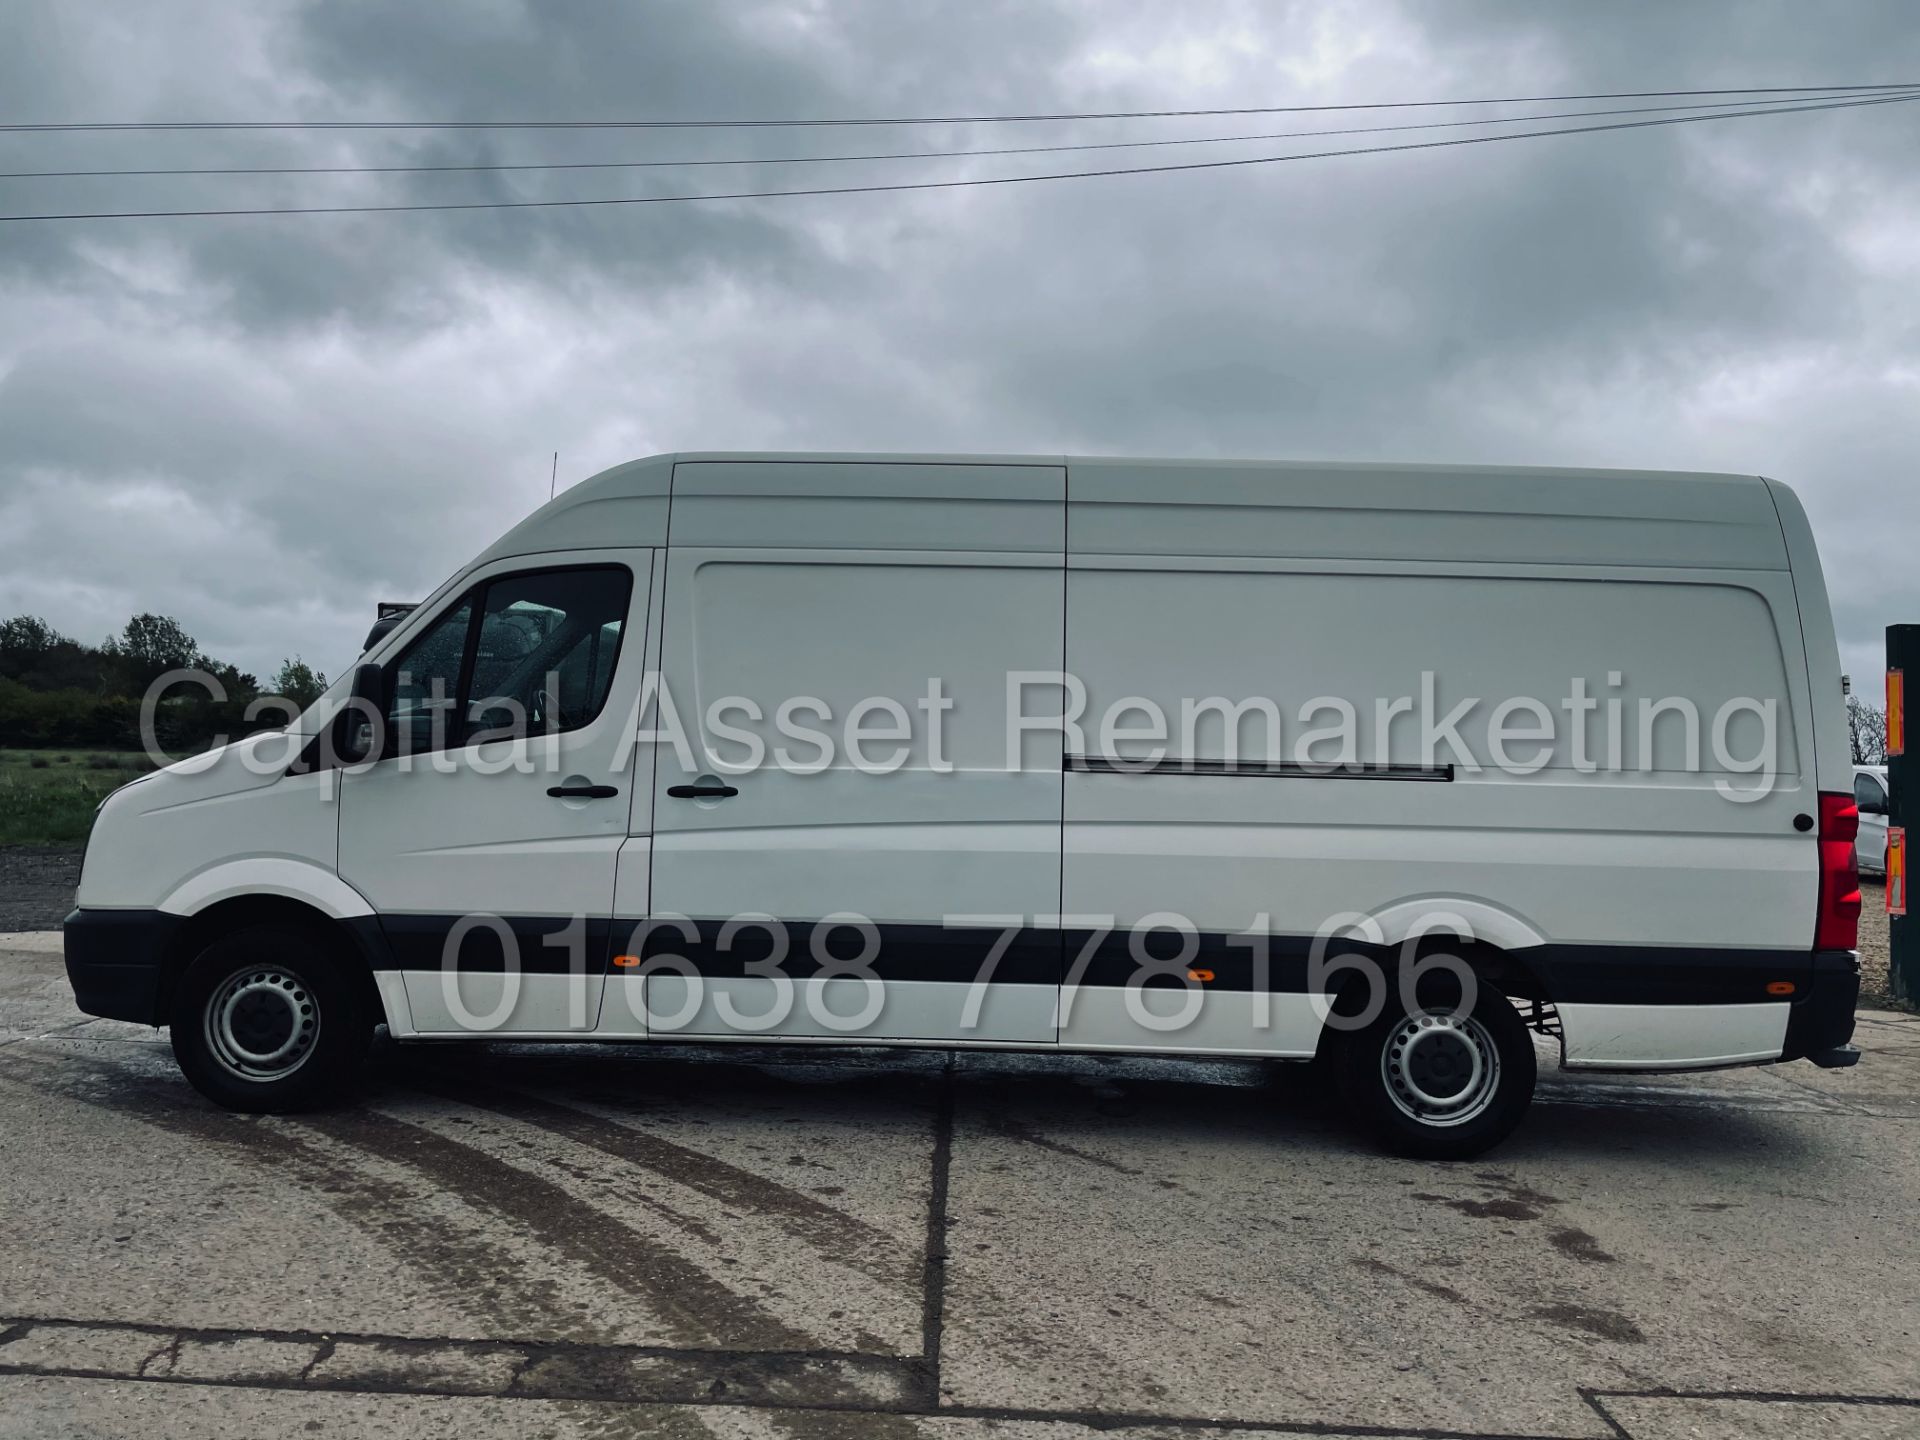 VOLKSWAGEN CRAFTER CR35 *LWB HI-ROOF* (2017 - EURO 6) '2.0 TDI BMT - 6 SPEED' *CRUISE CONTROL* - Image 8 of 39